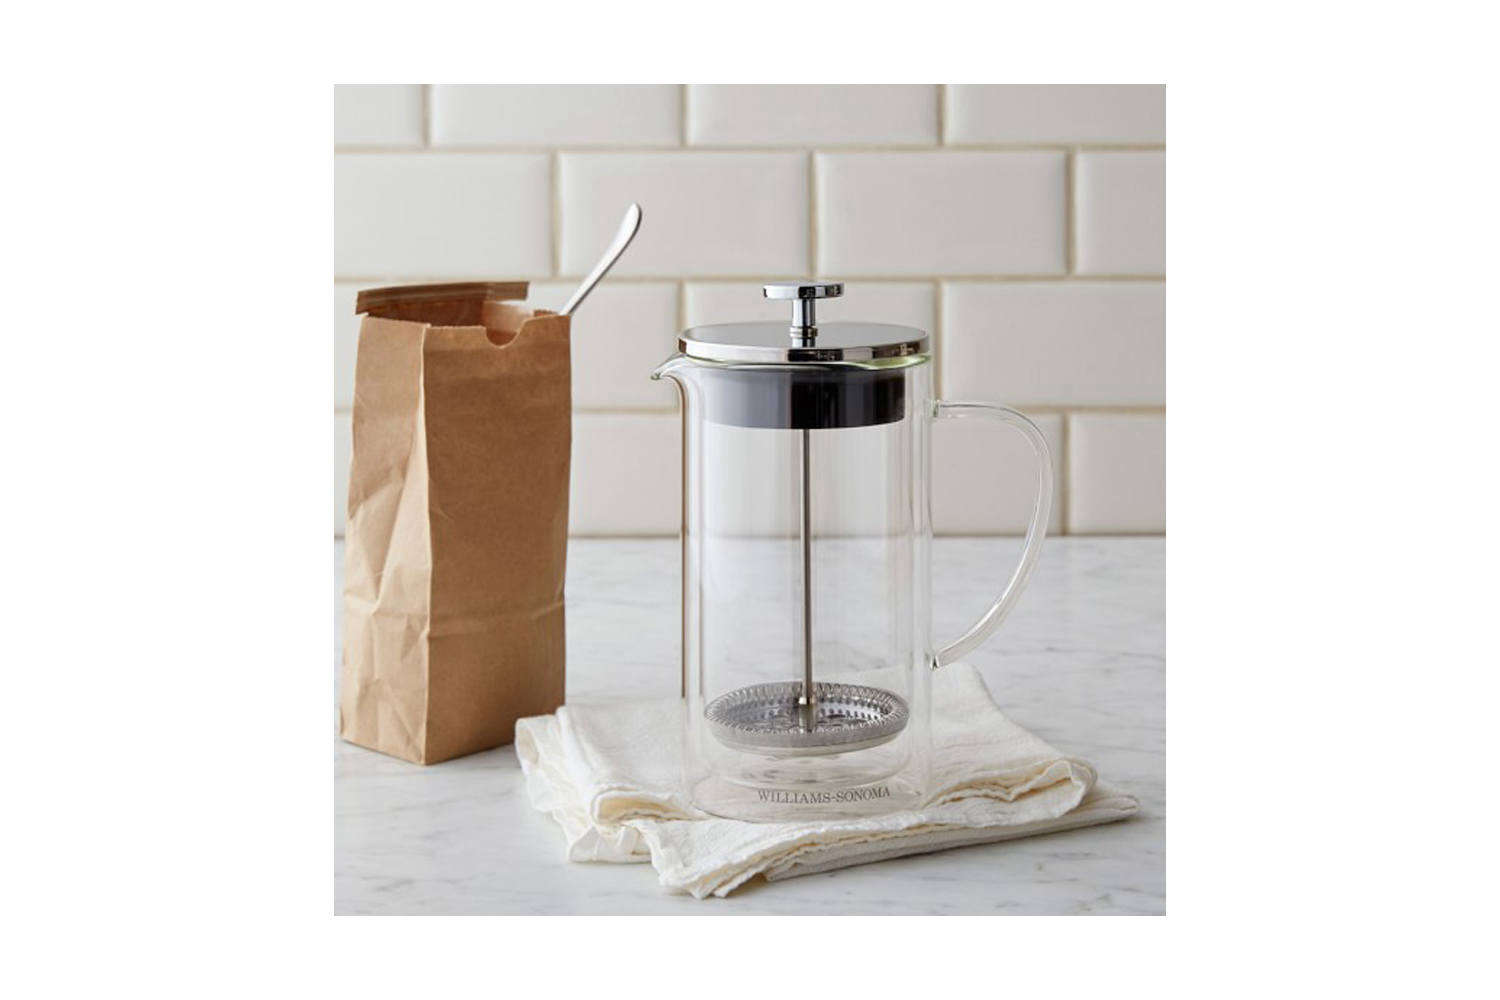 https://www.remodelista.com/wp-content/uploads/2018/07/williams-sonoma-double-wall-glass-french-press.jpg